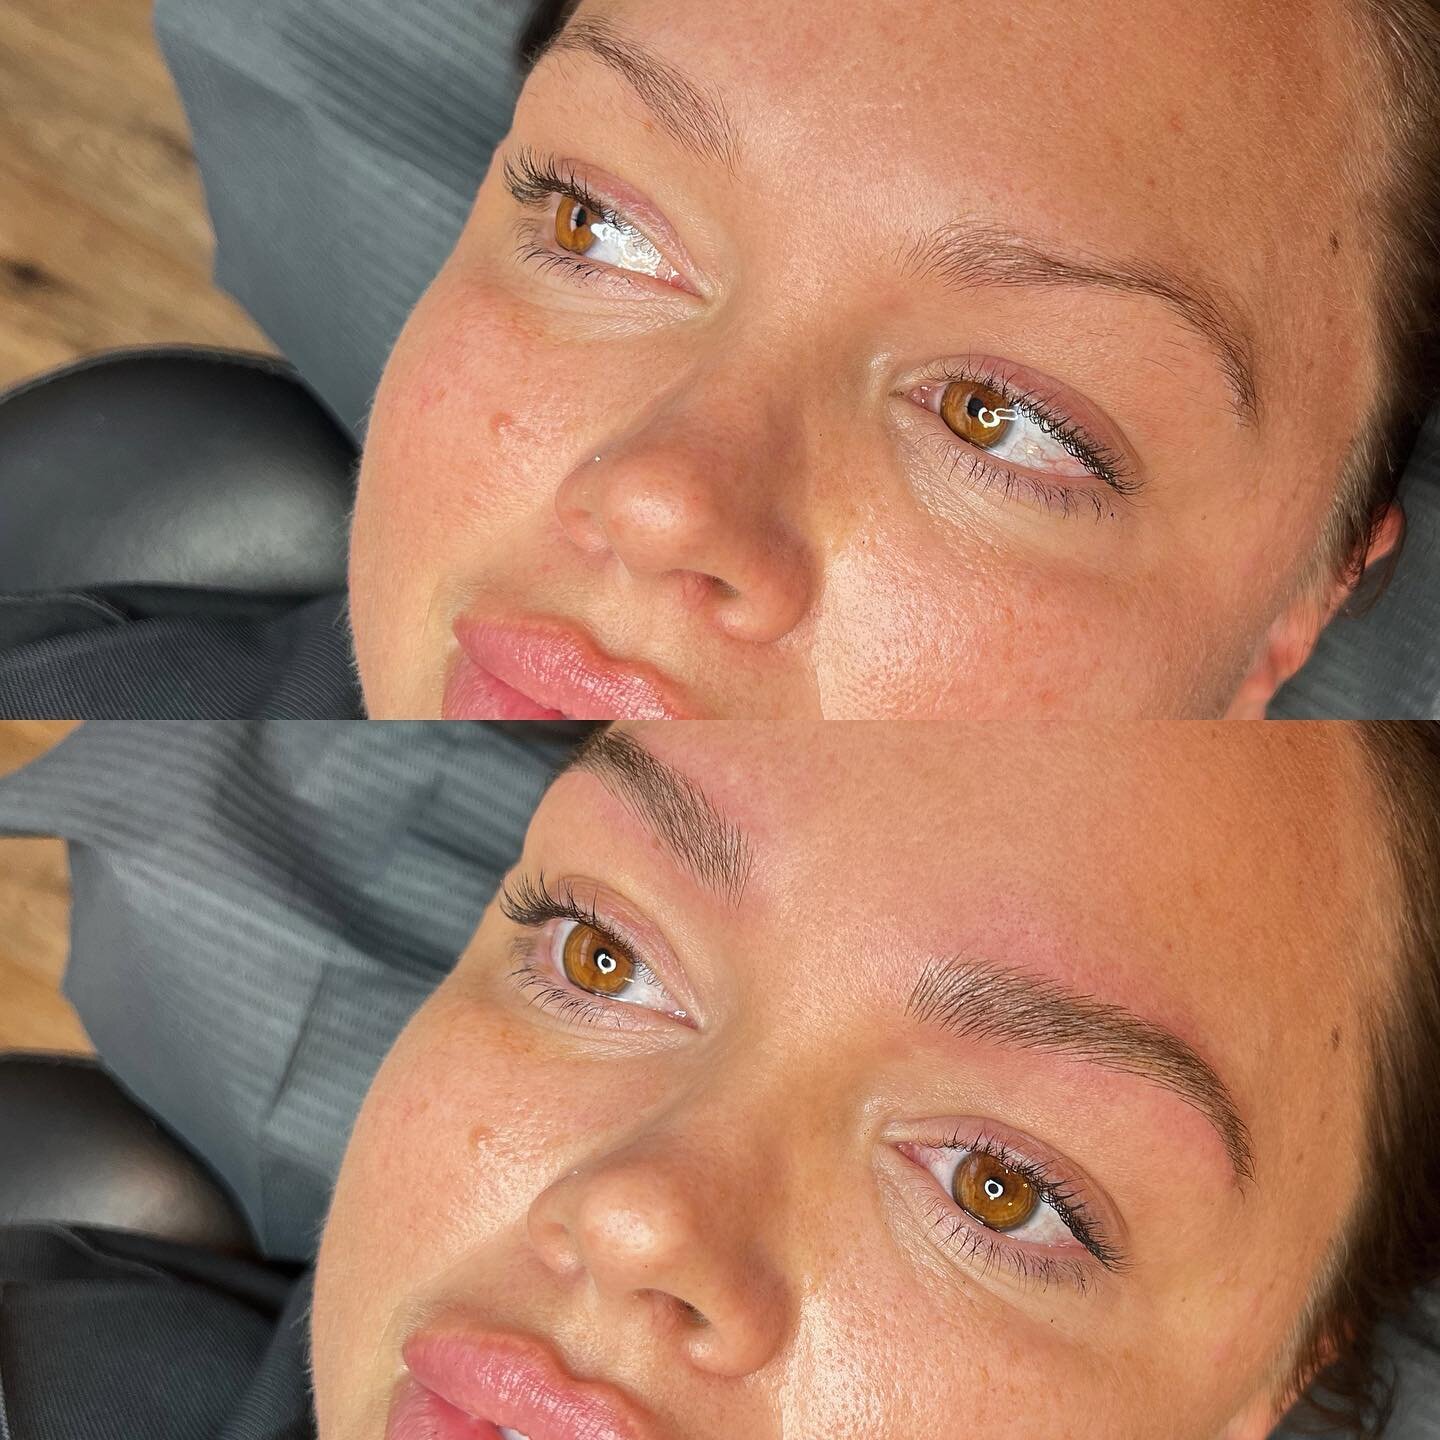 First Session Microblading + Shading.
.
#knoxvillemicroblading #knoxvilletattoo #knoxvilletanning #knoxvillelashes #ashevillemicroblading #ashevillebrows #ashevilletattoo #ashevillehairstylist #johnsoncitymicroblading #johnsoncitytattoo #johnsoncityh